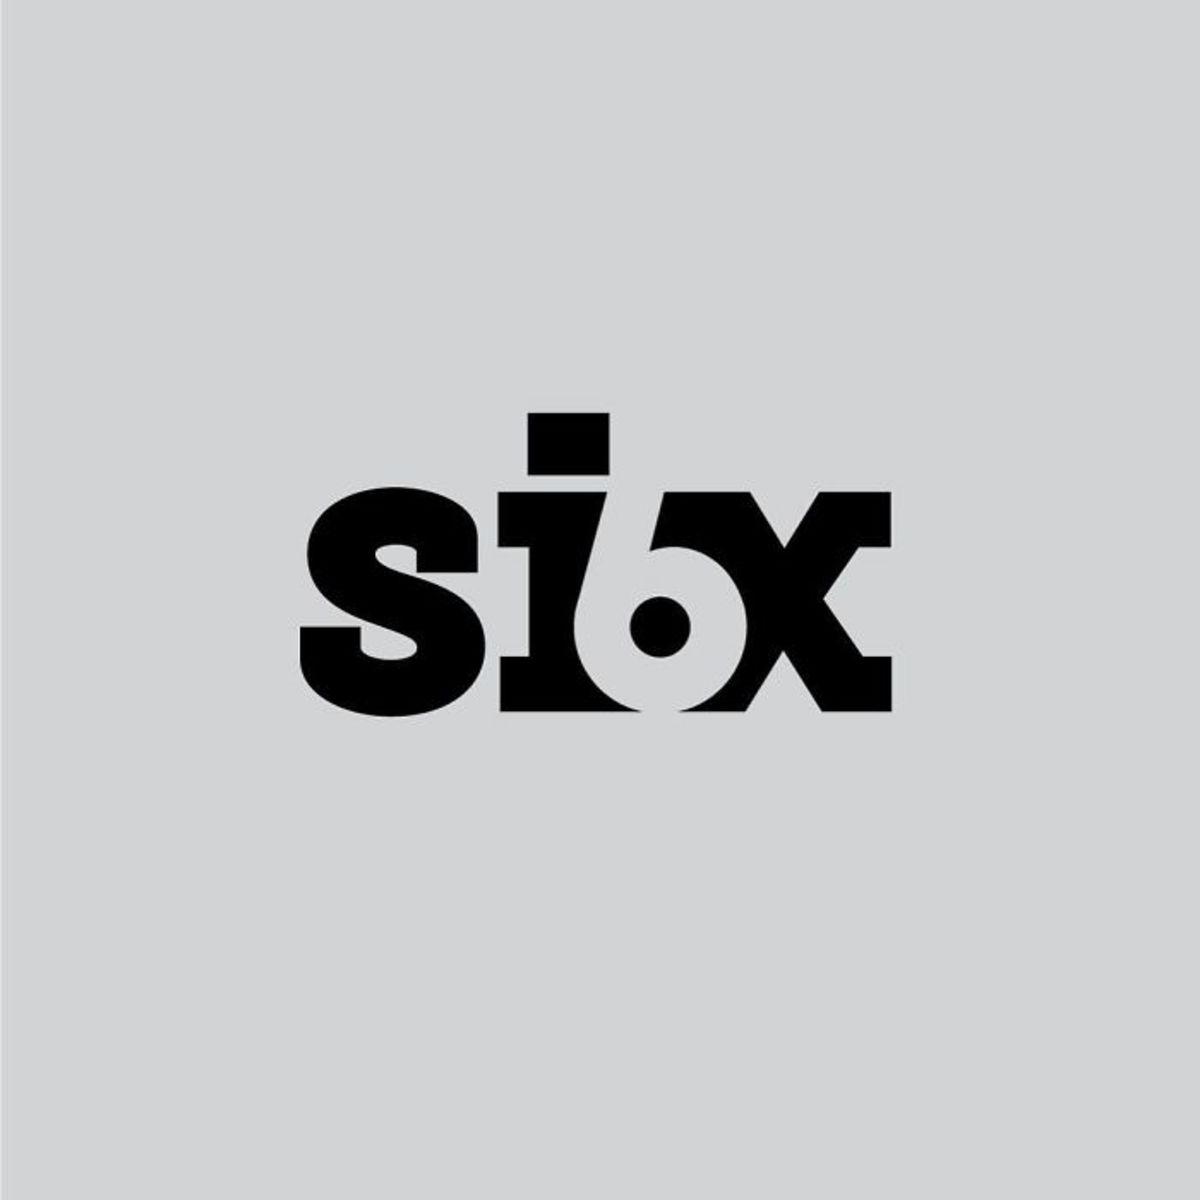 Six -Word Logo - Designer Challenges Himself To Create A Minimal Logo For A Word